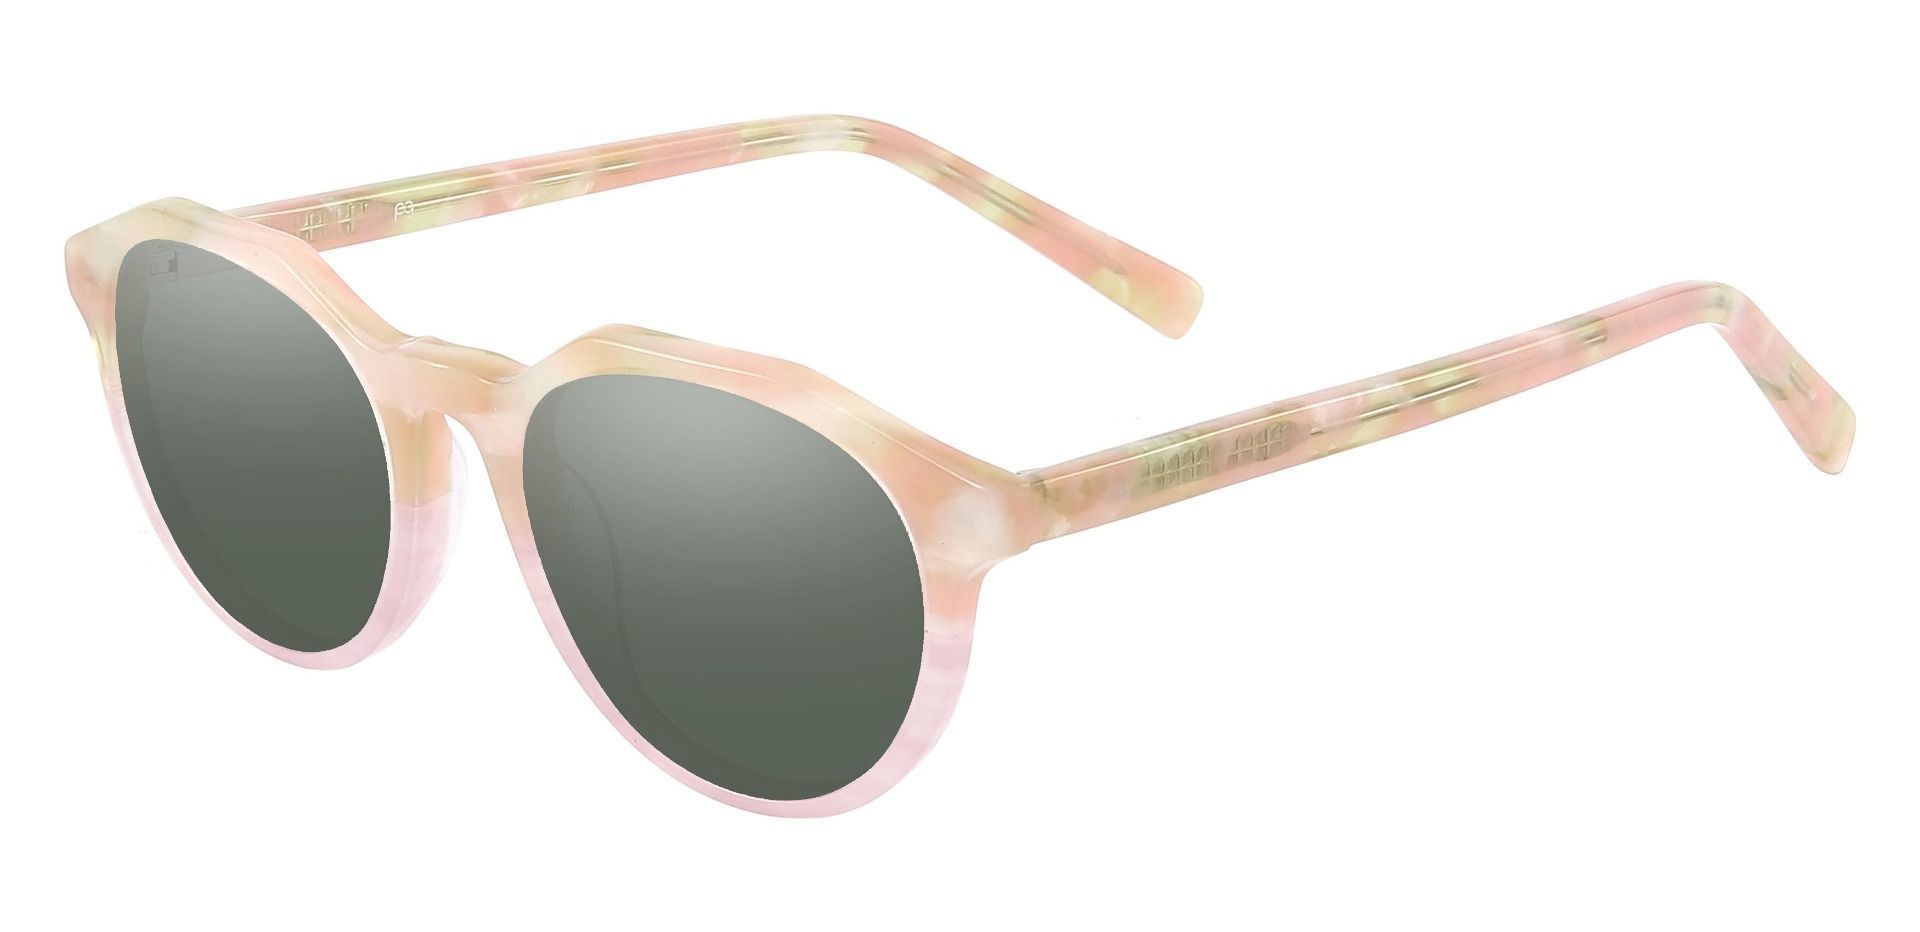 Mayfield Oval Prescription Sunglasses - Pink Frame With Green Lenses